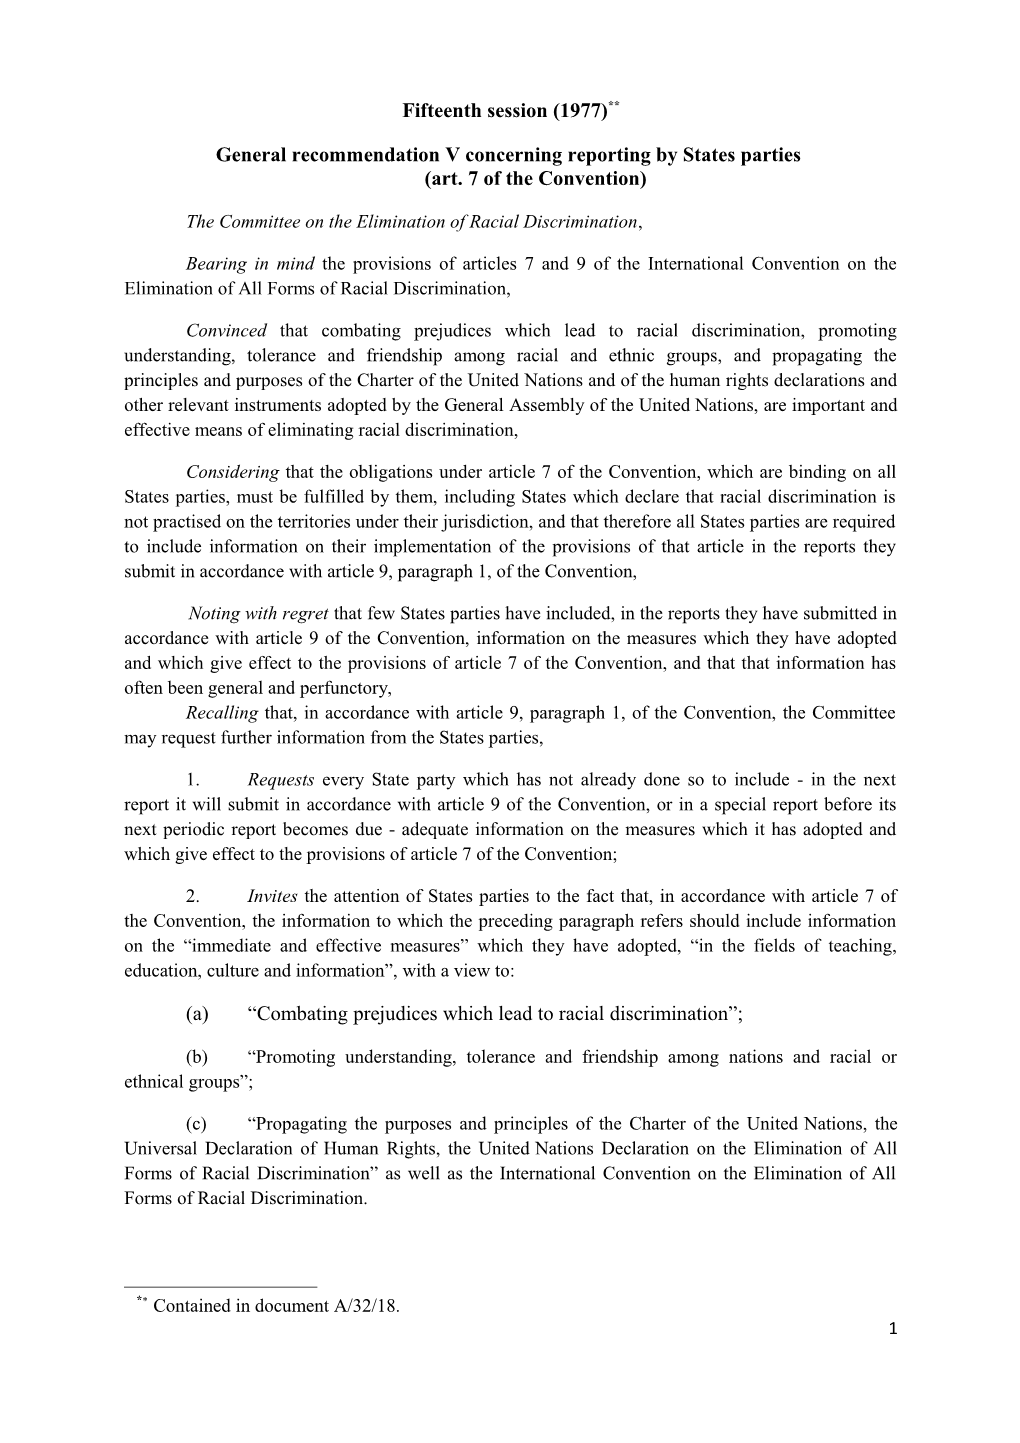 General Recommendation V Concerning Reporting by States Parties (Art. 7 of the Convention)